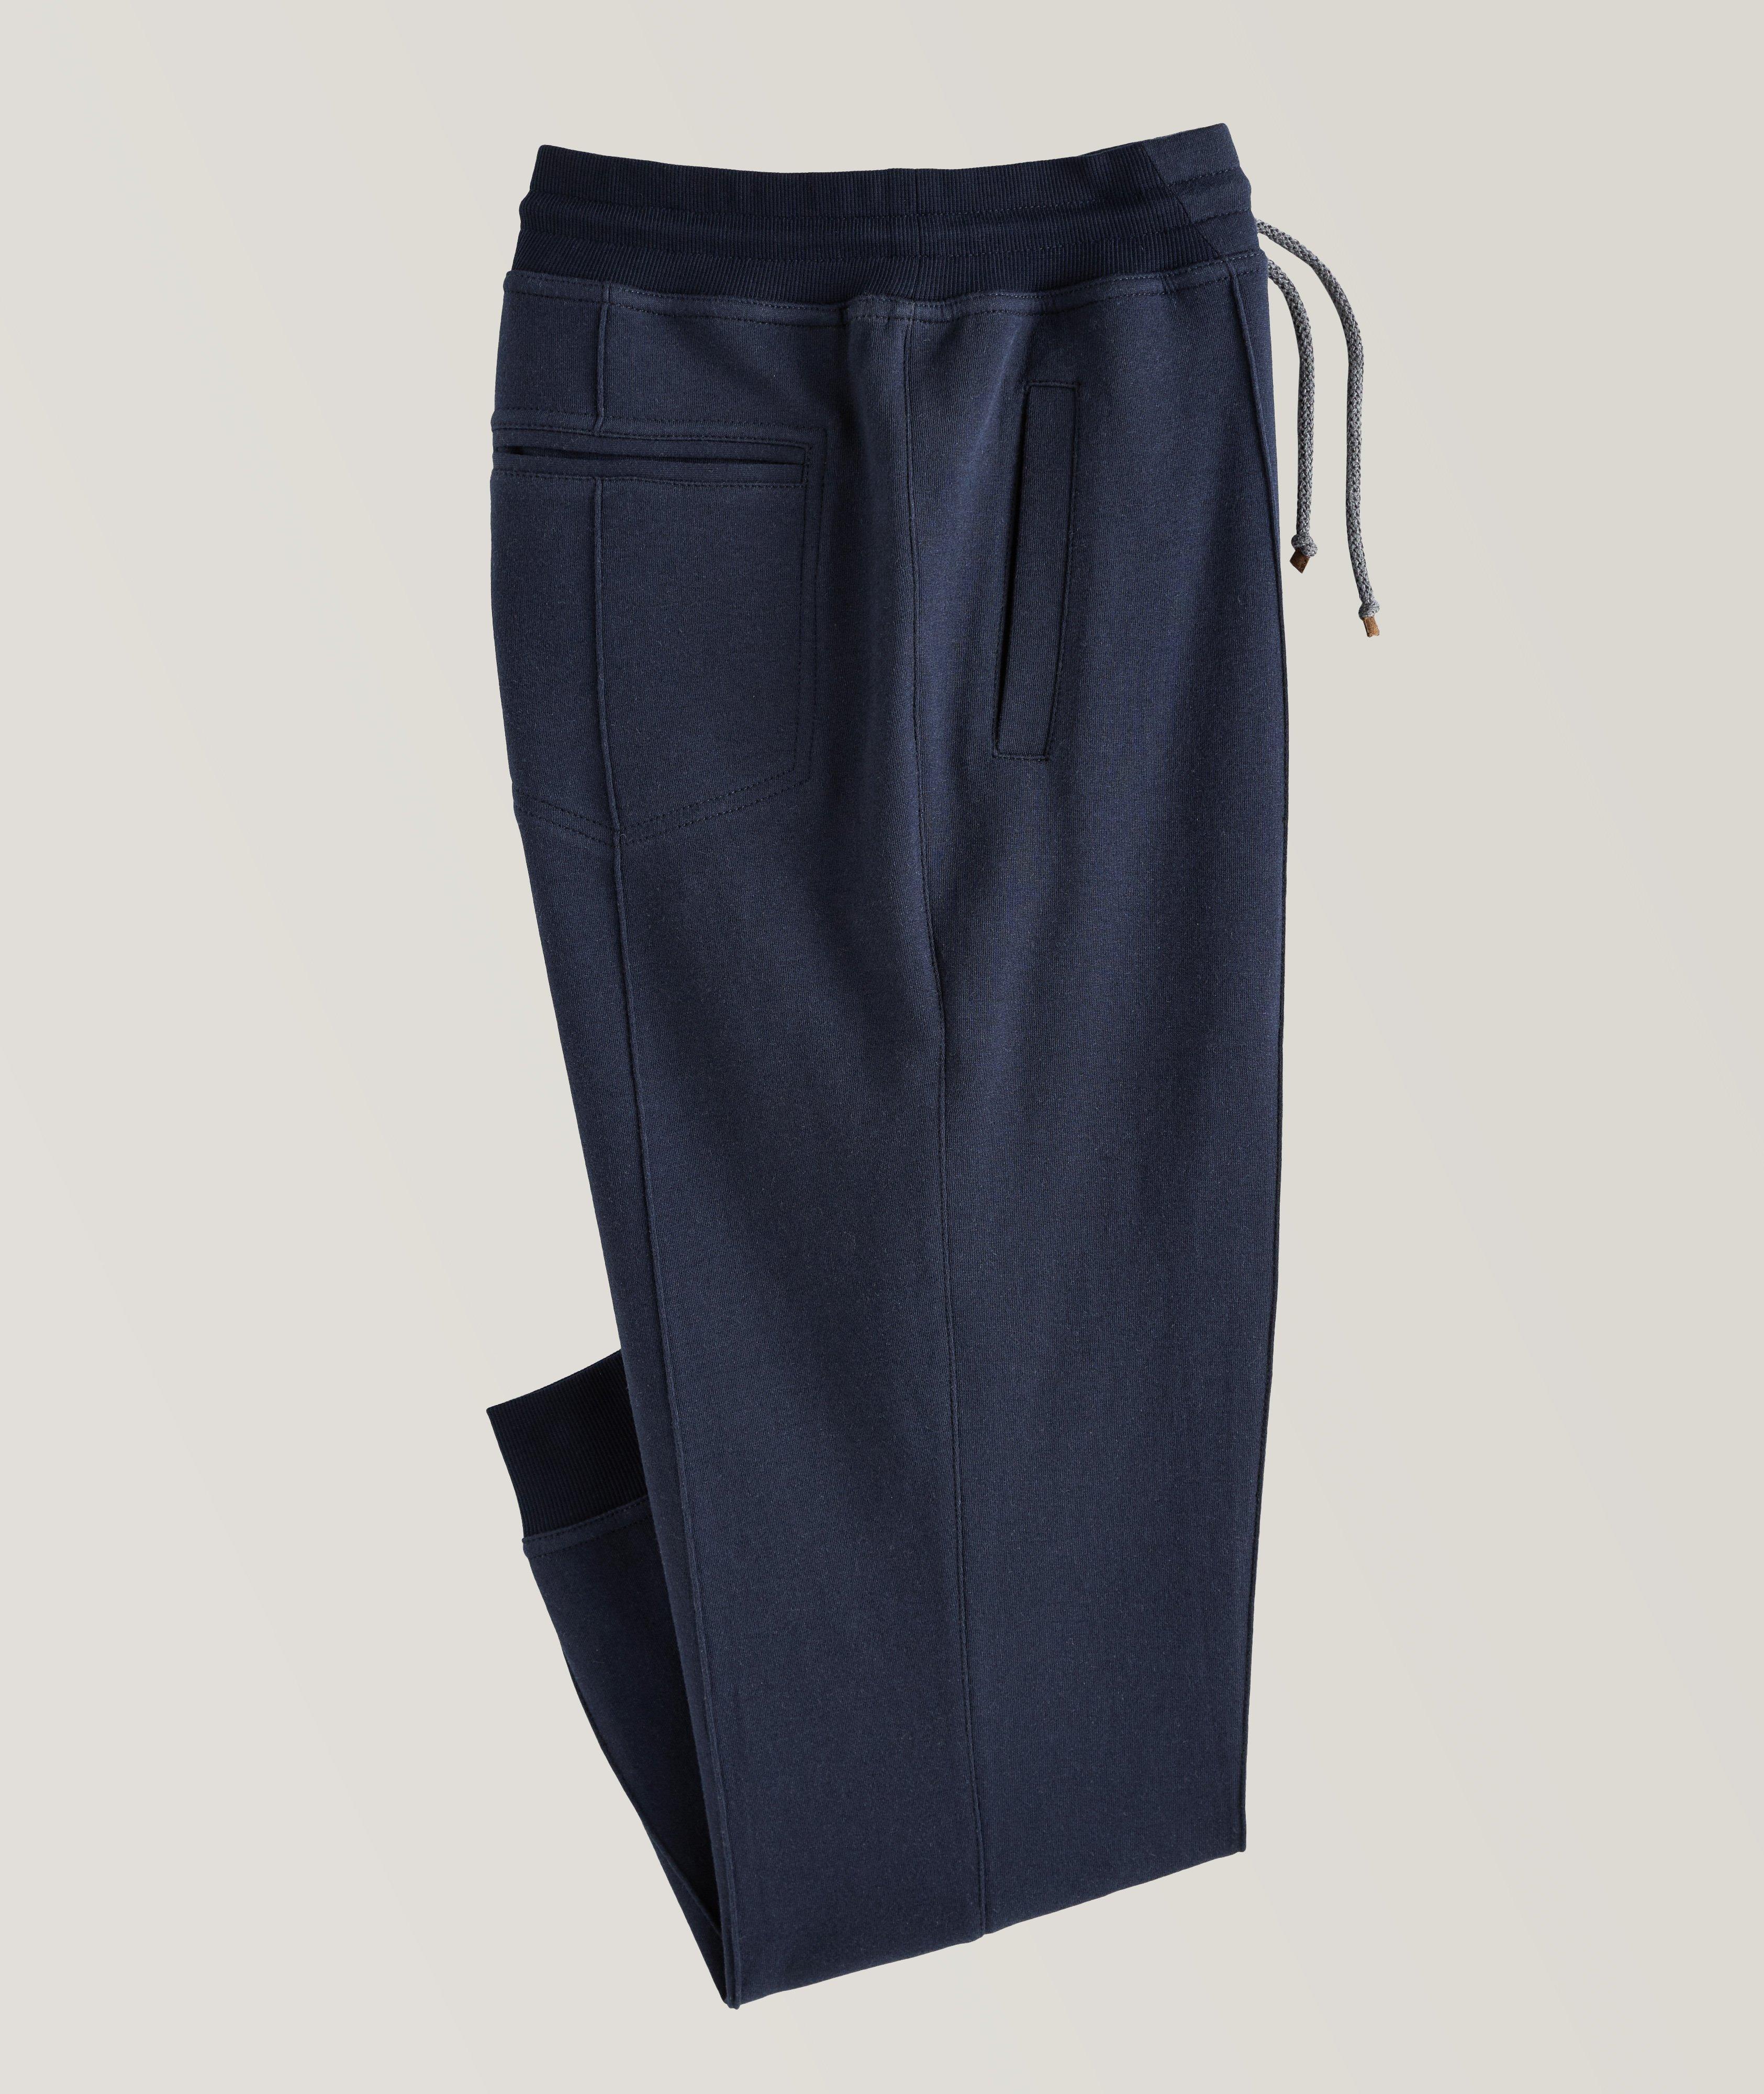 Cotton Pleated Drawstring Joggers image 0